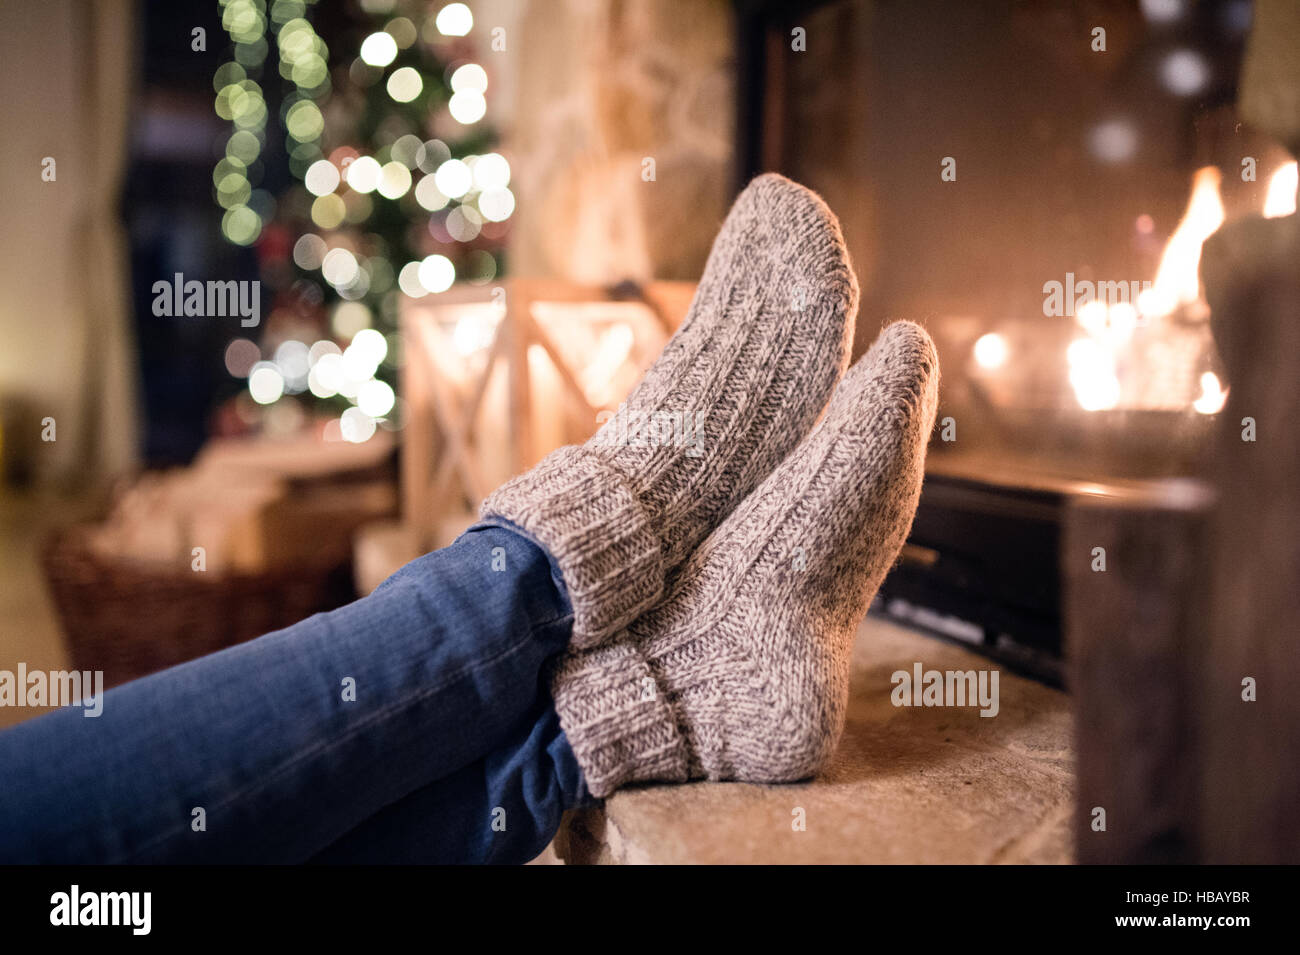 Feet of unrecognizable woman in socks by the Christmas fireplace Stock Photo